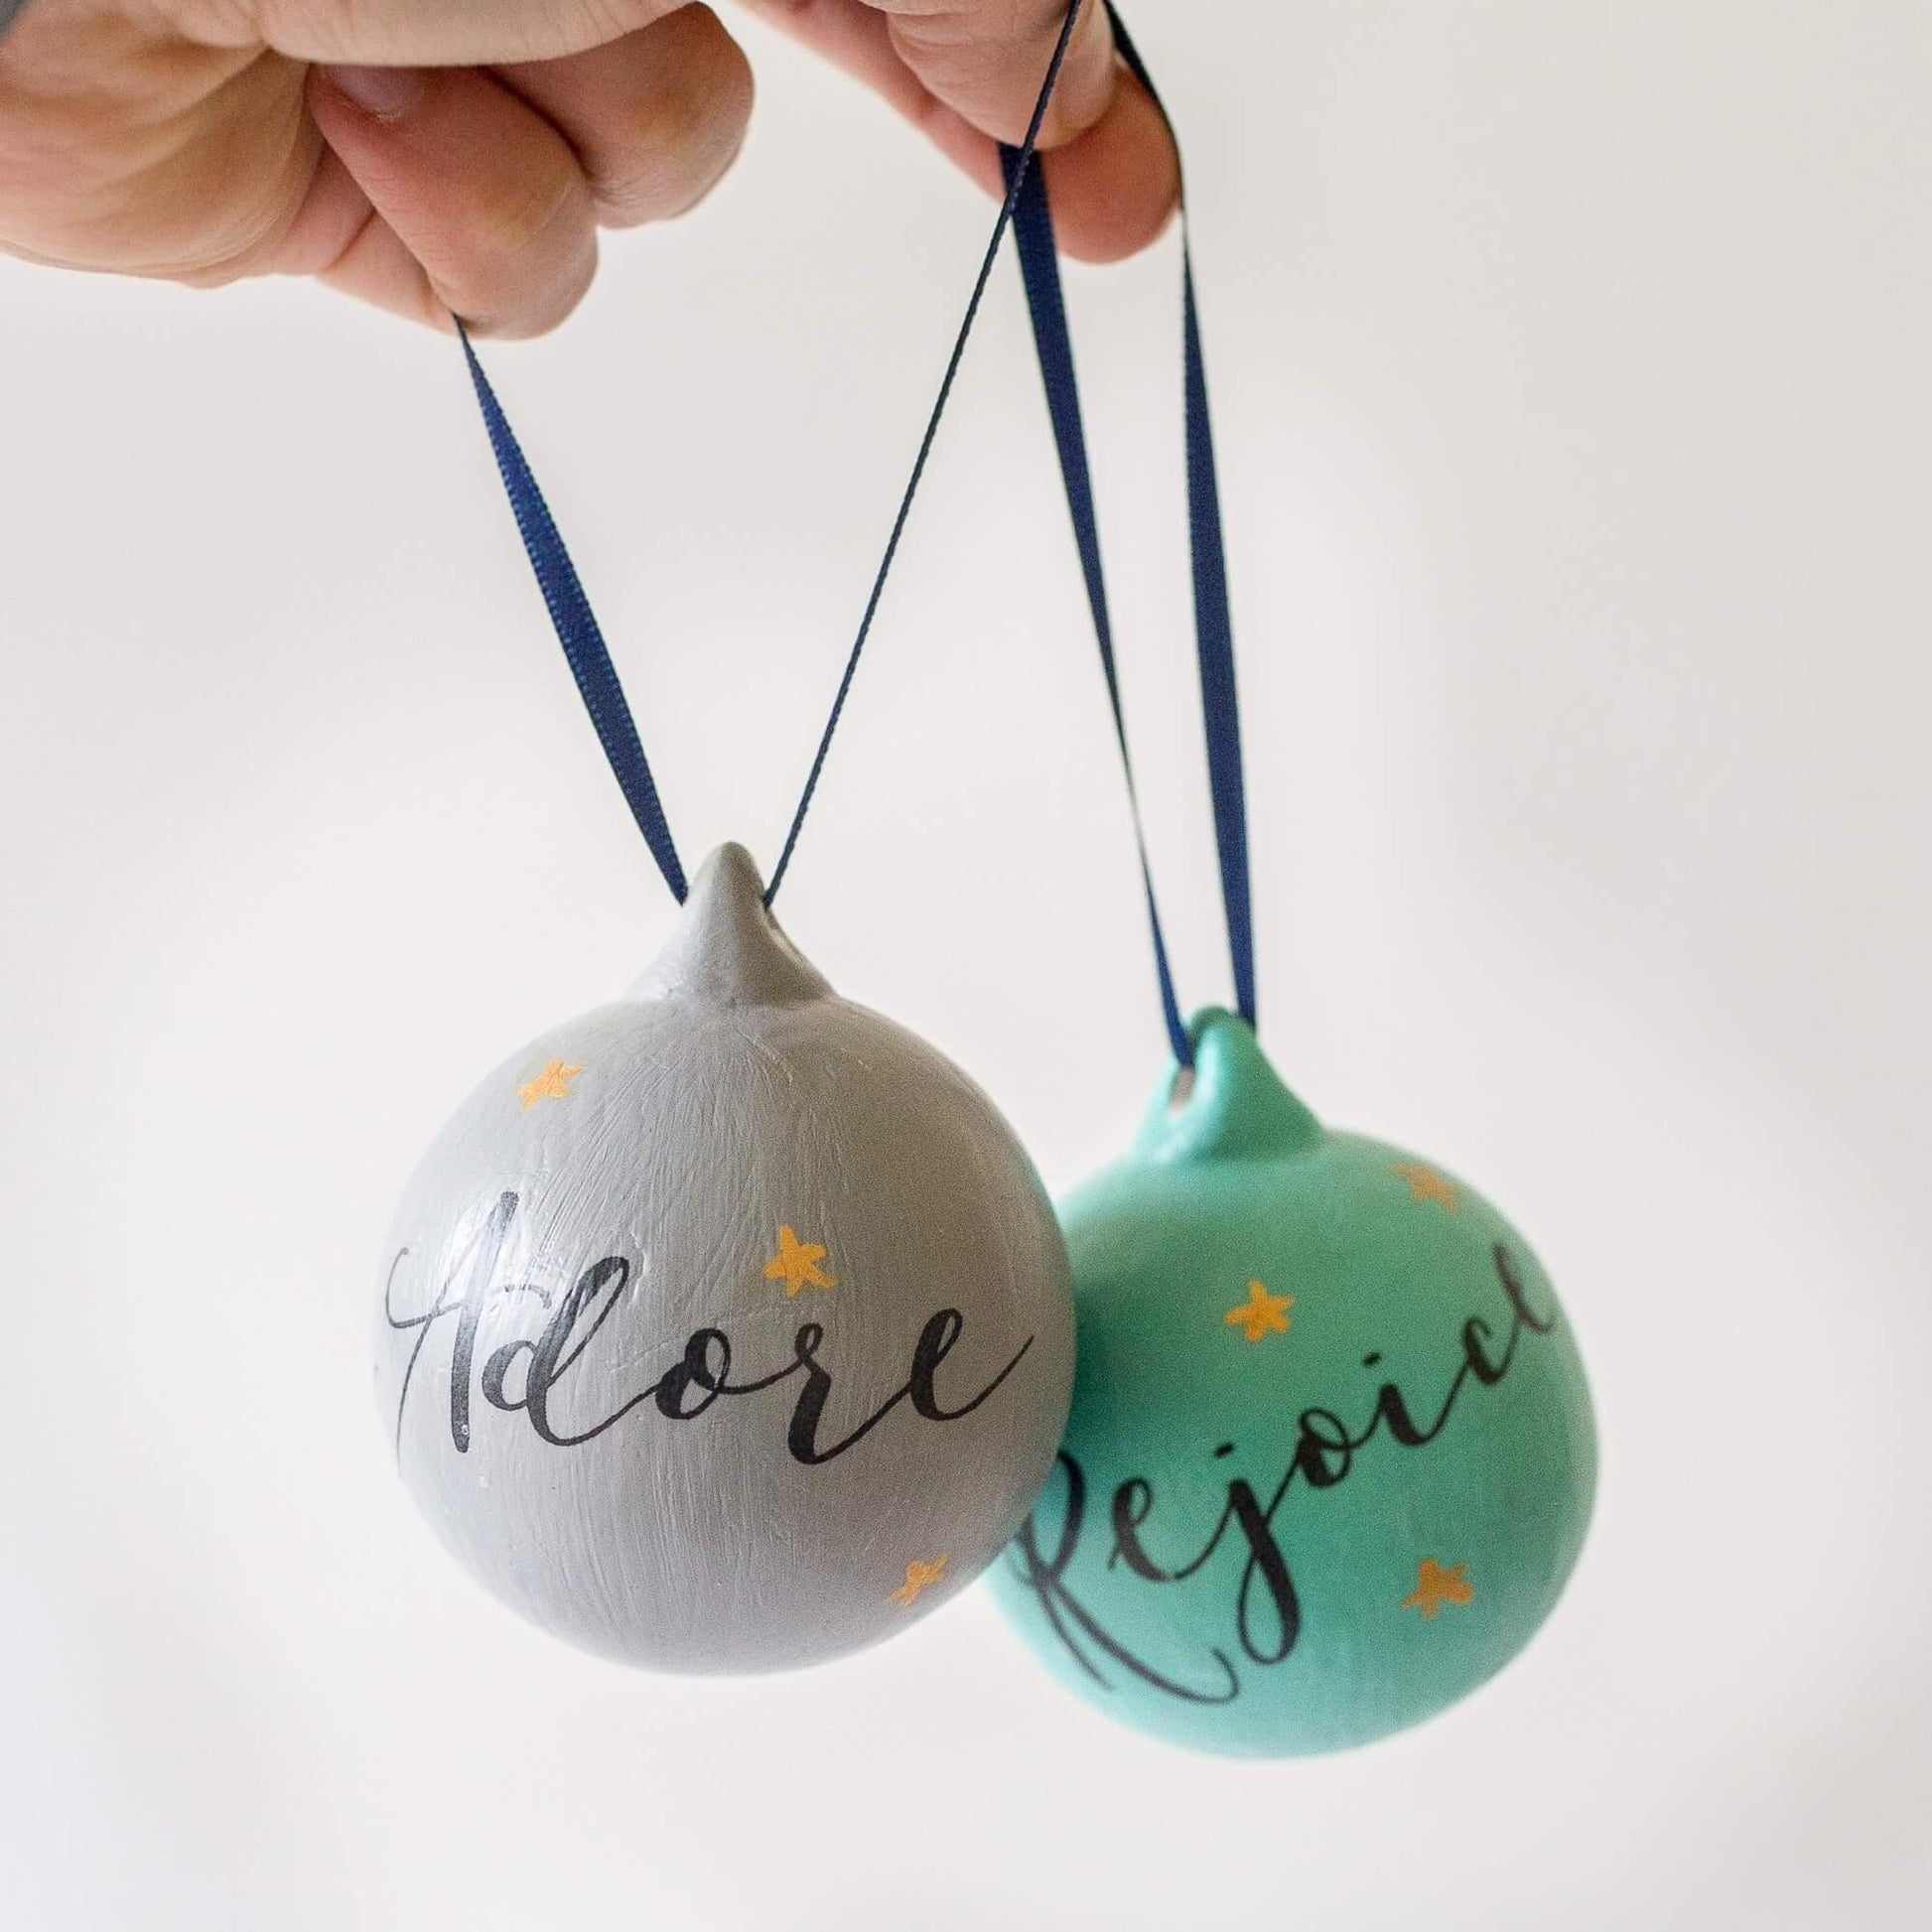 Hand painted and lettered religious Christmas ornaments